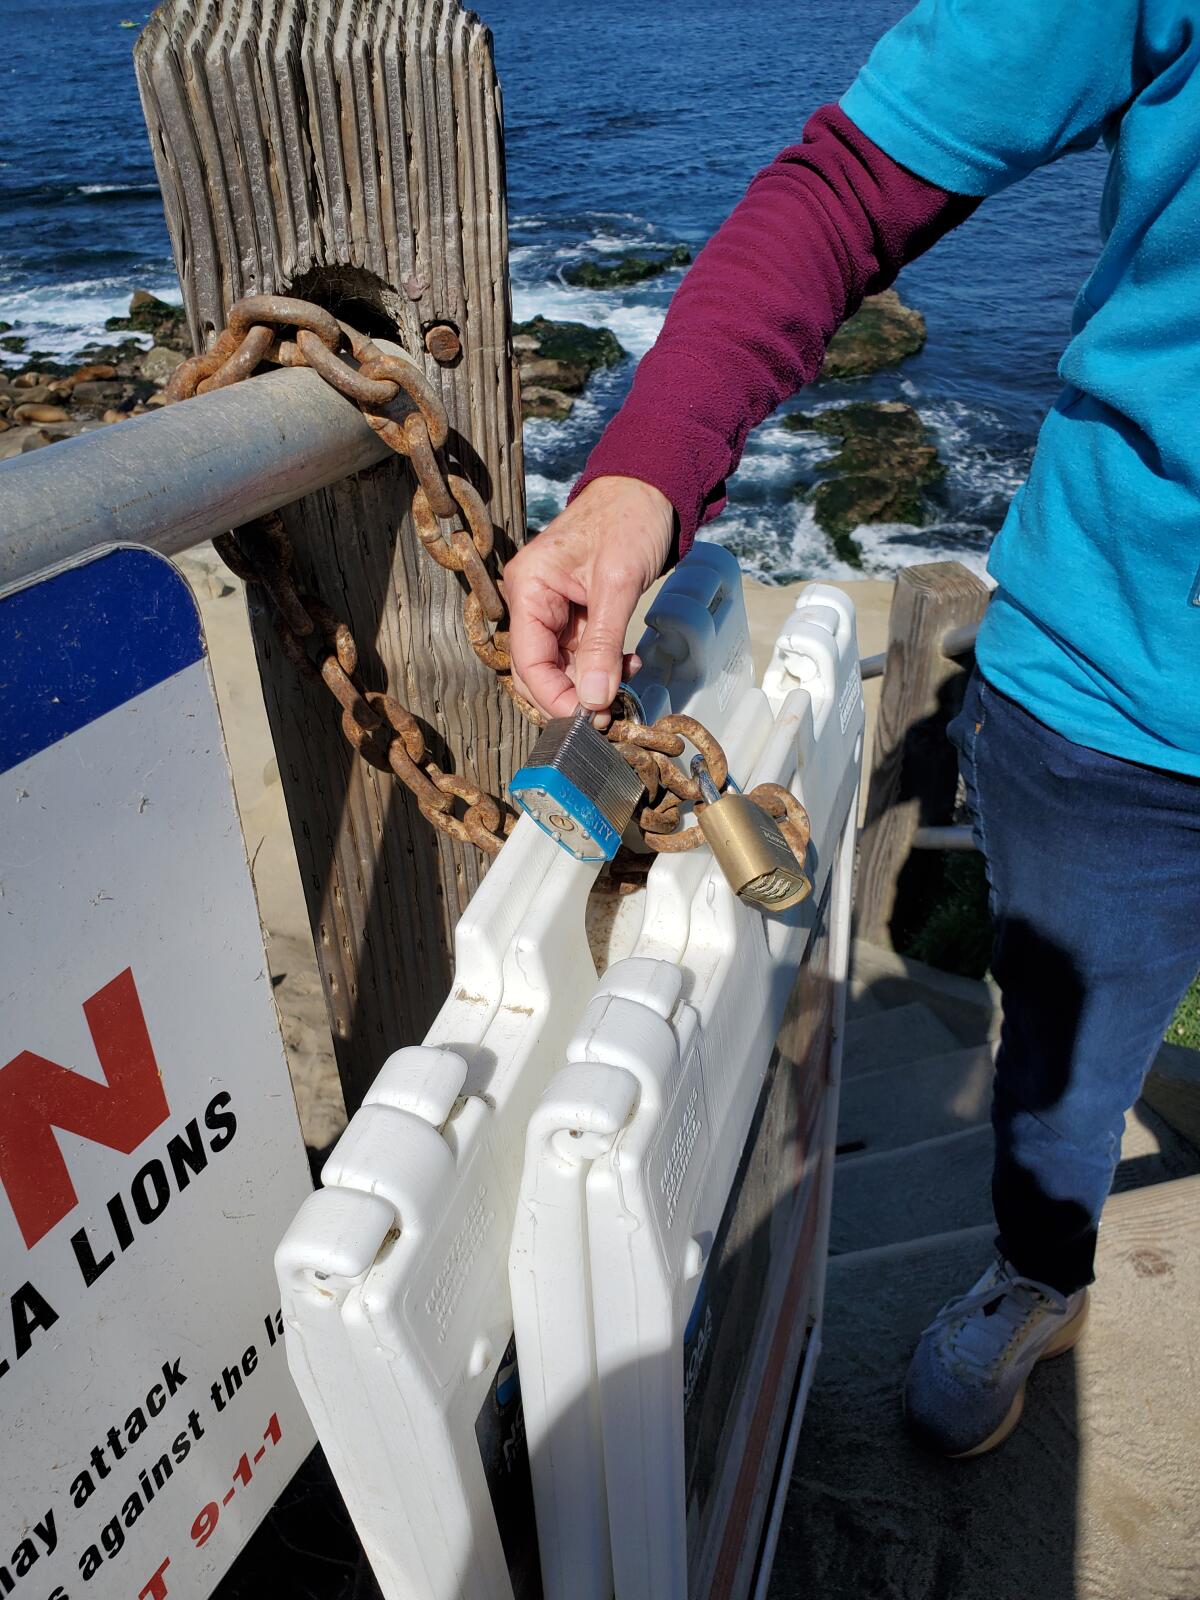 Robyn Davidoff shows a silver lock placed on signs that instruct people to keep their distance from sea lions in La Jolla.